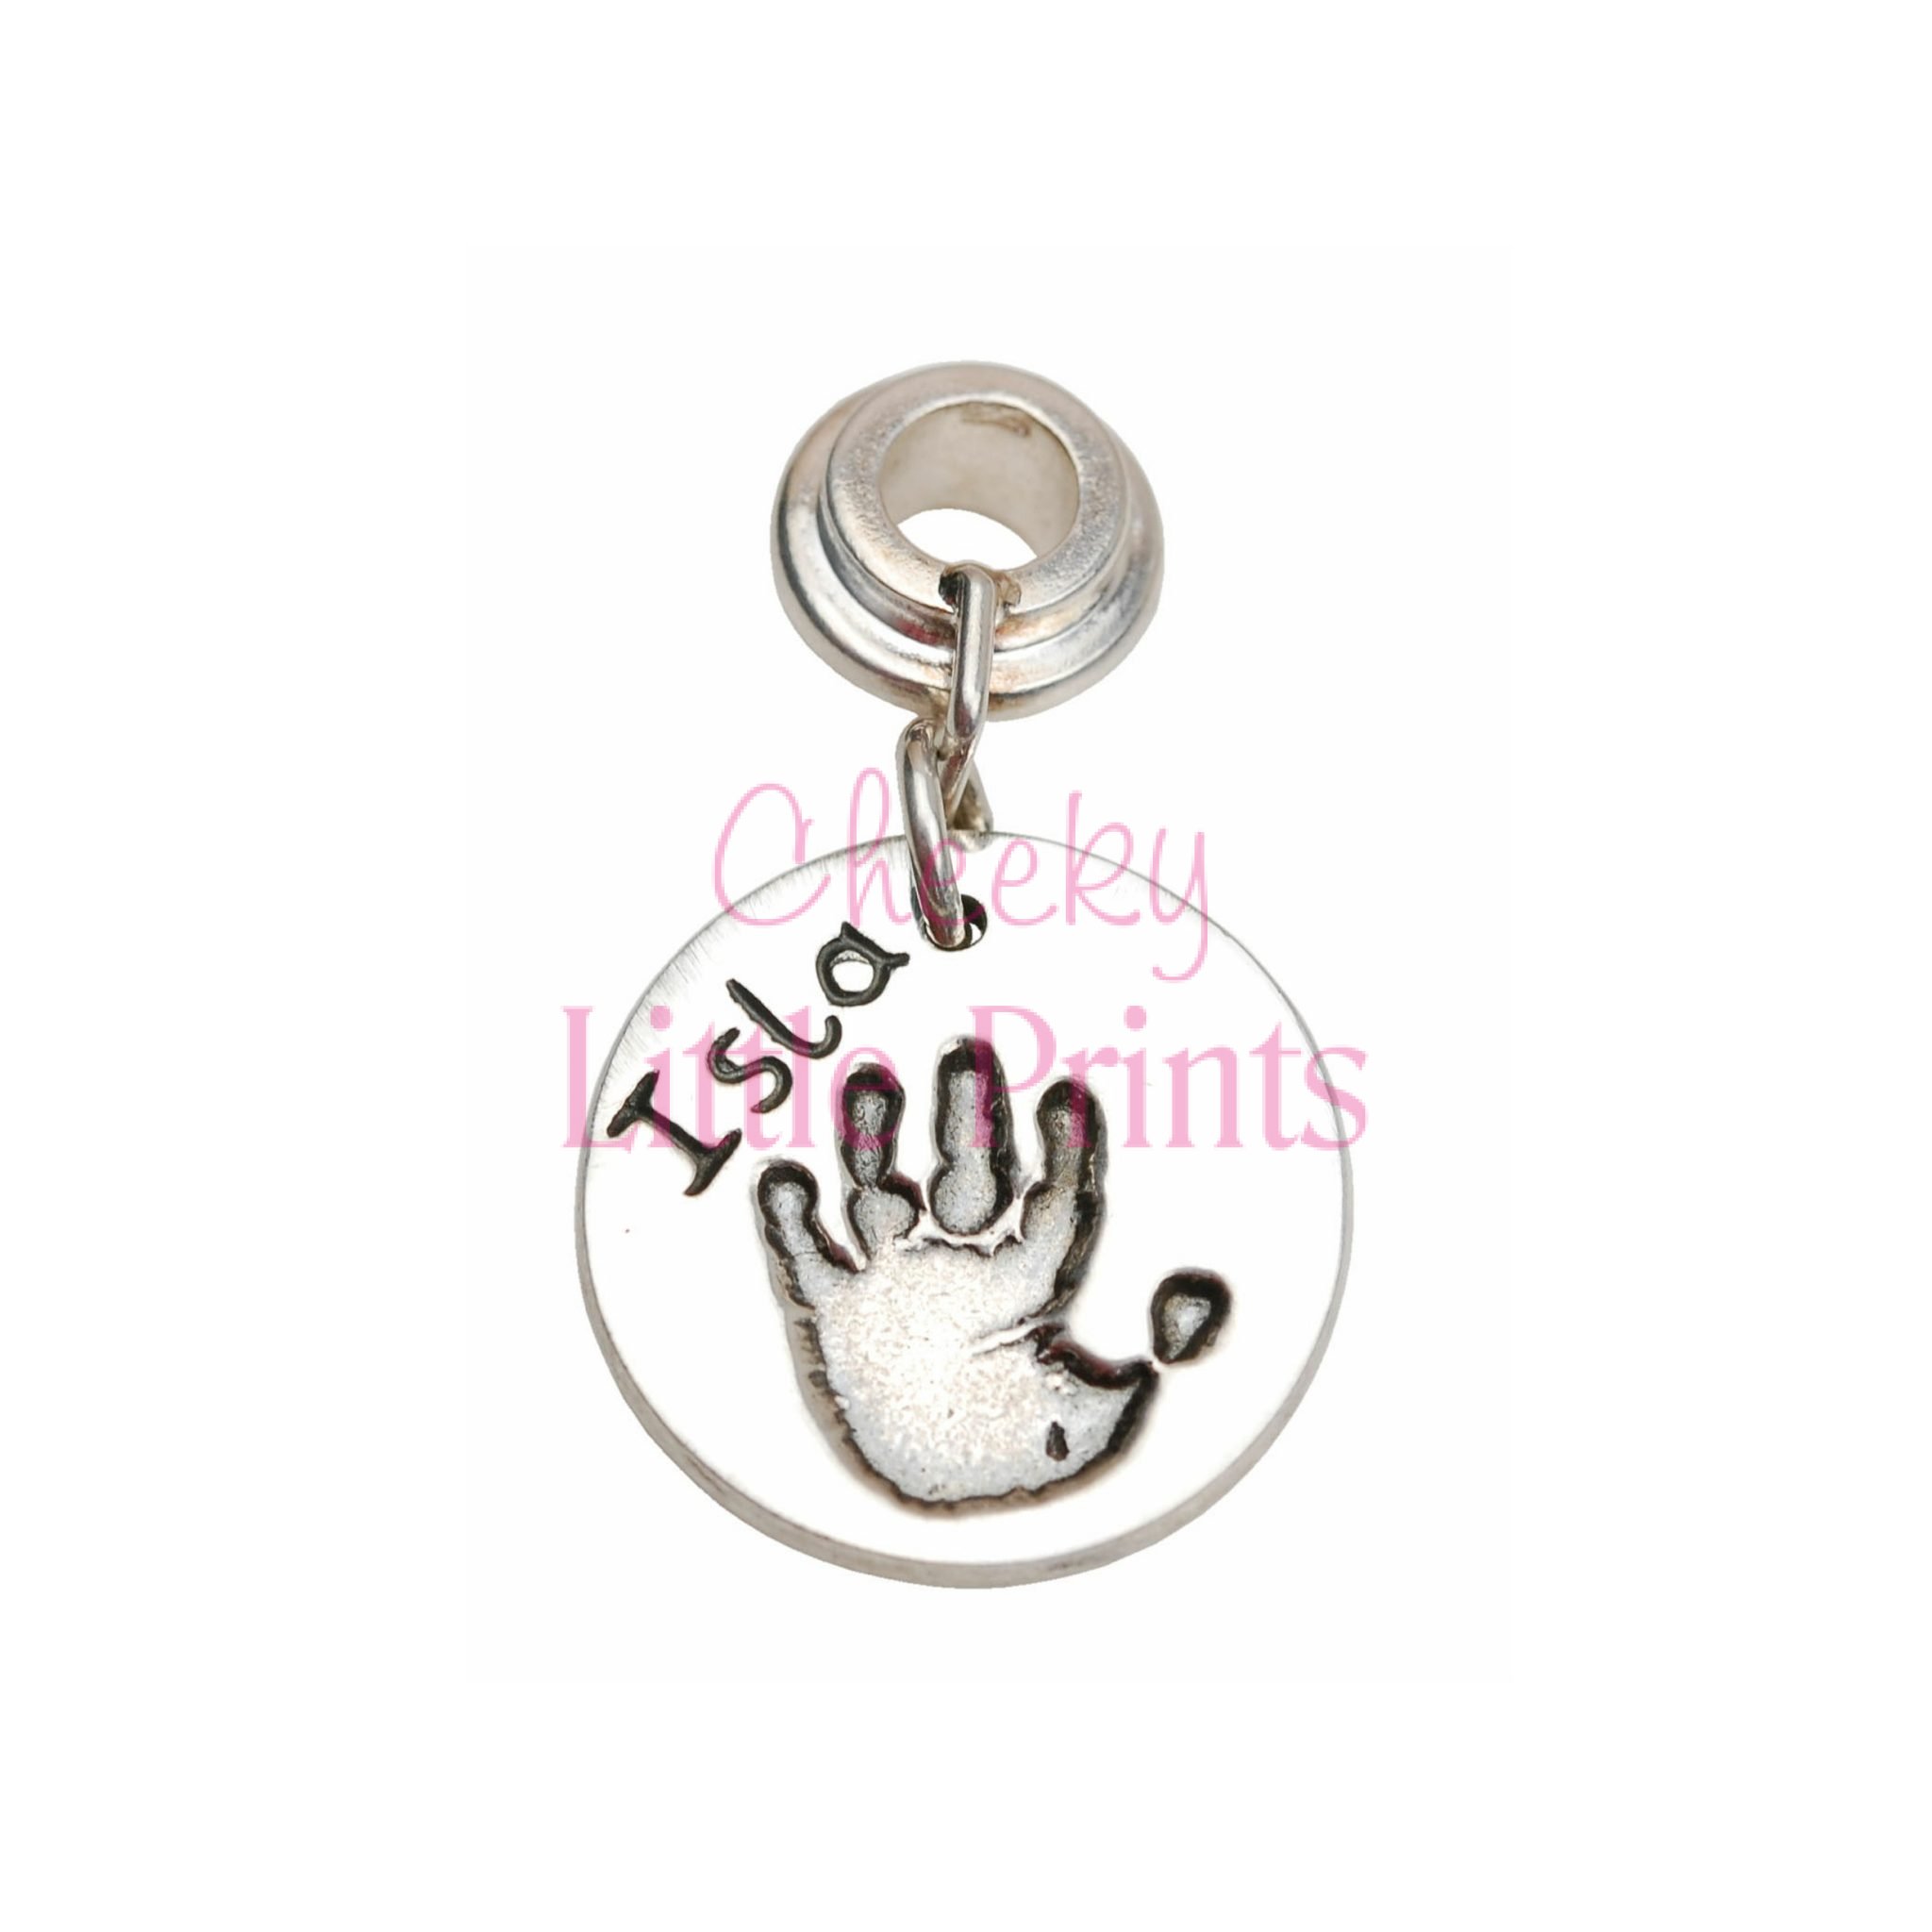 Regular silver hand print charm with charm carrier